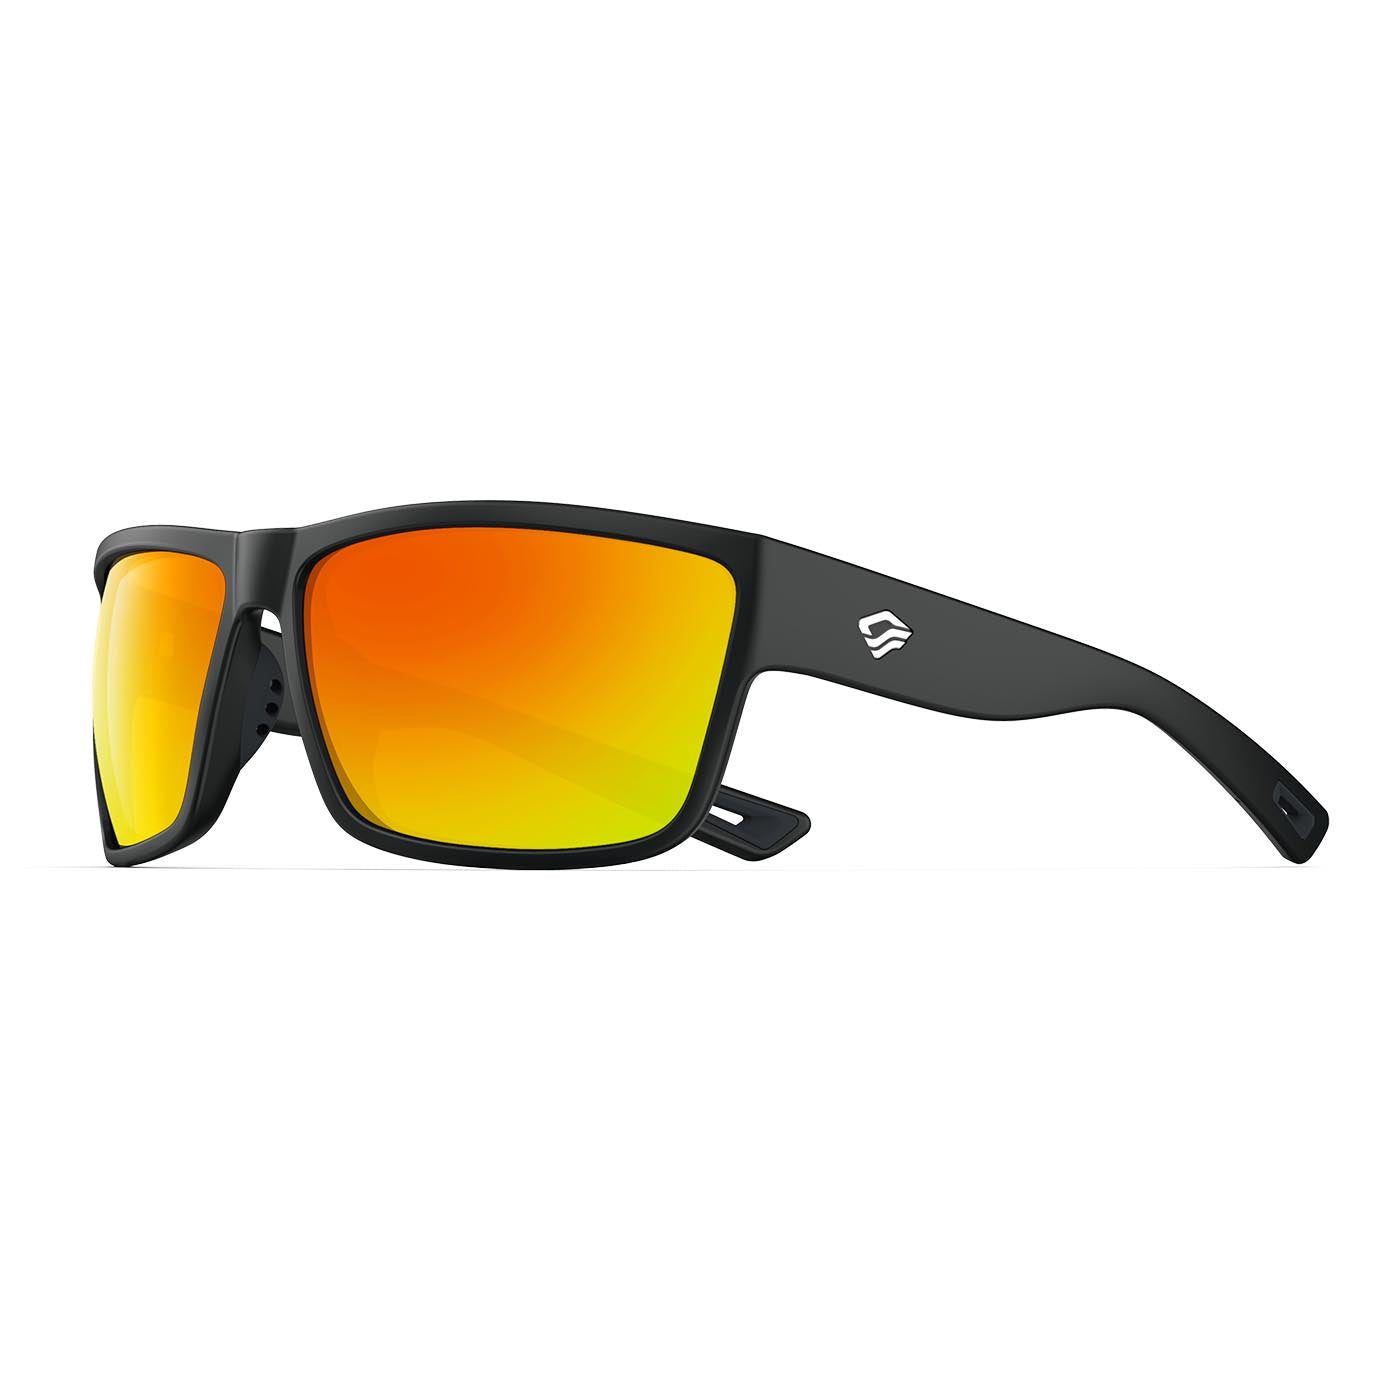 Ocean Rainbow Polarized Sports Sunglasses with Lifetime Warranty -  Adjustable and Flexible Frame - Ideal for Men and Women - Ideal for  Cycling, Running, Golf, and Fishing - Matte Black Frame & Polarized Orange  Mirrored